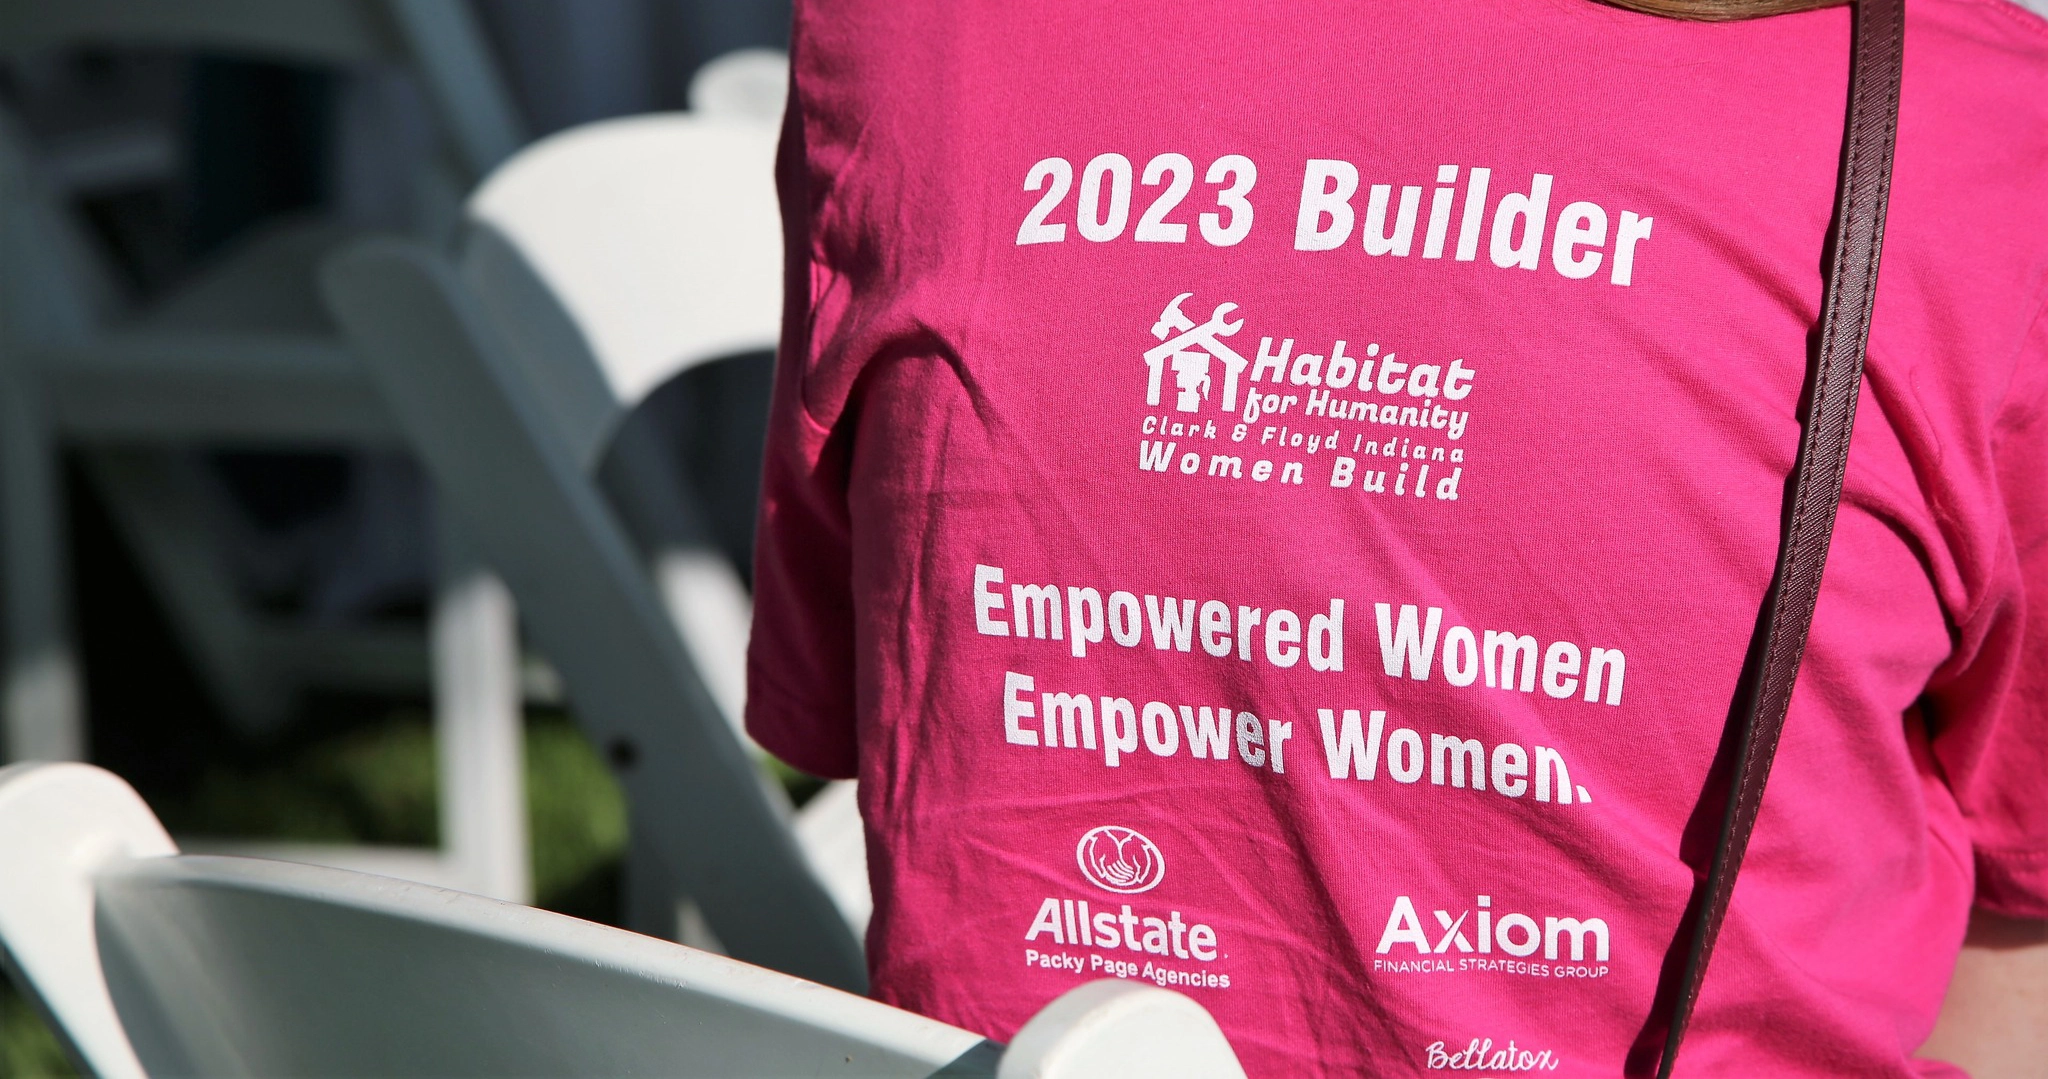 Infinity Homes builds with Habitat for Humanity